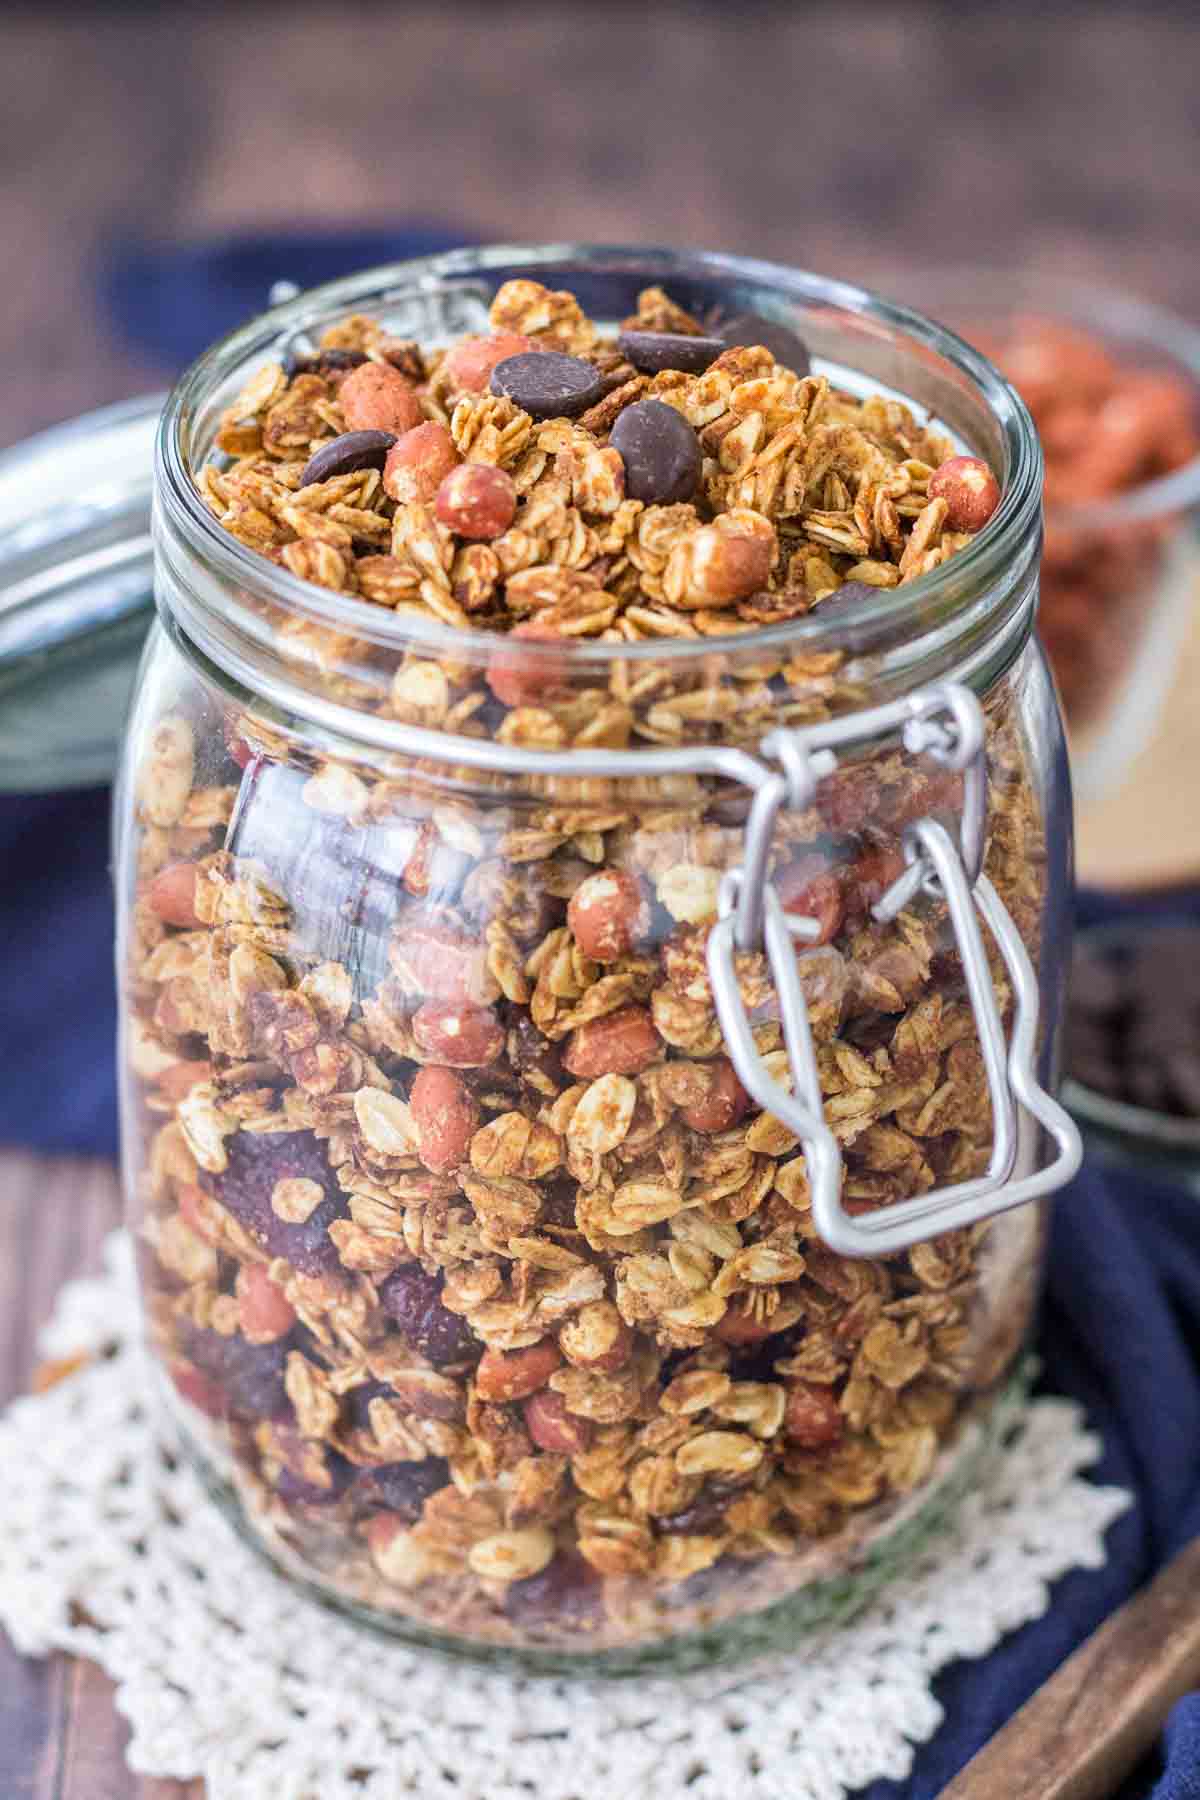 Homemade Granola stored in a glass jar